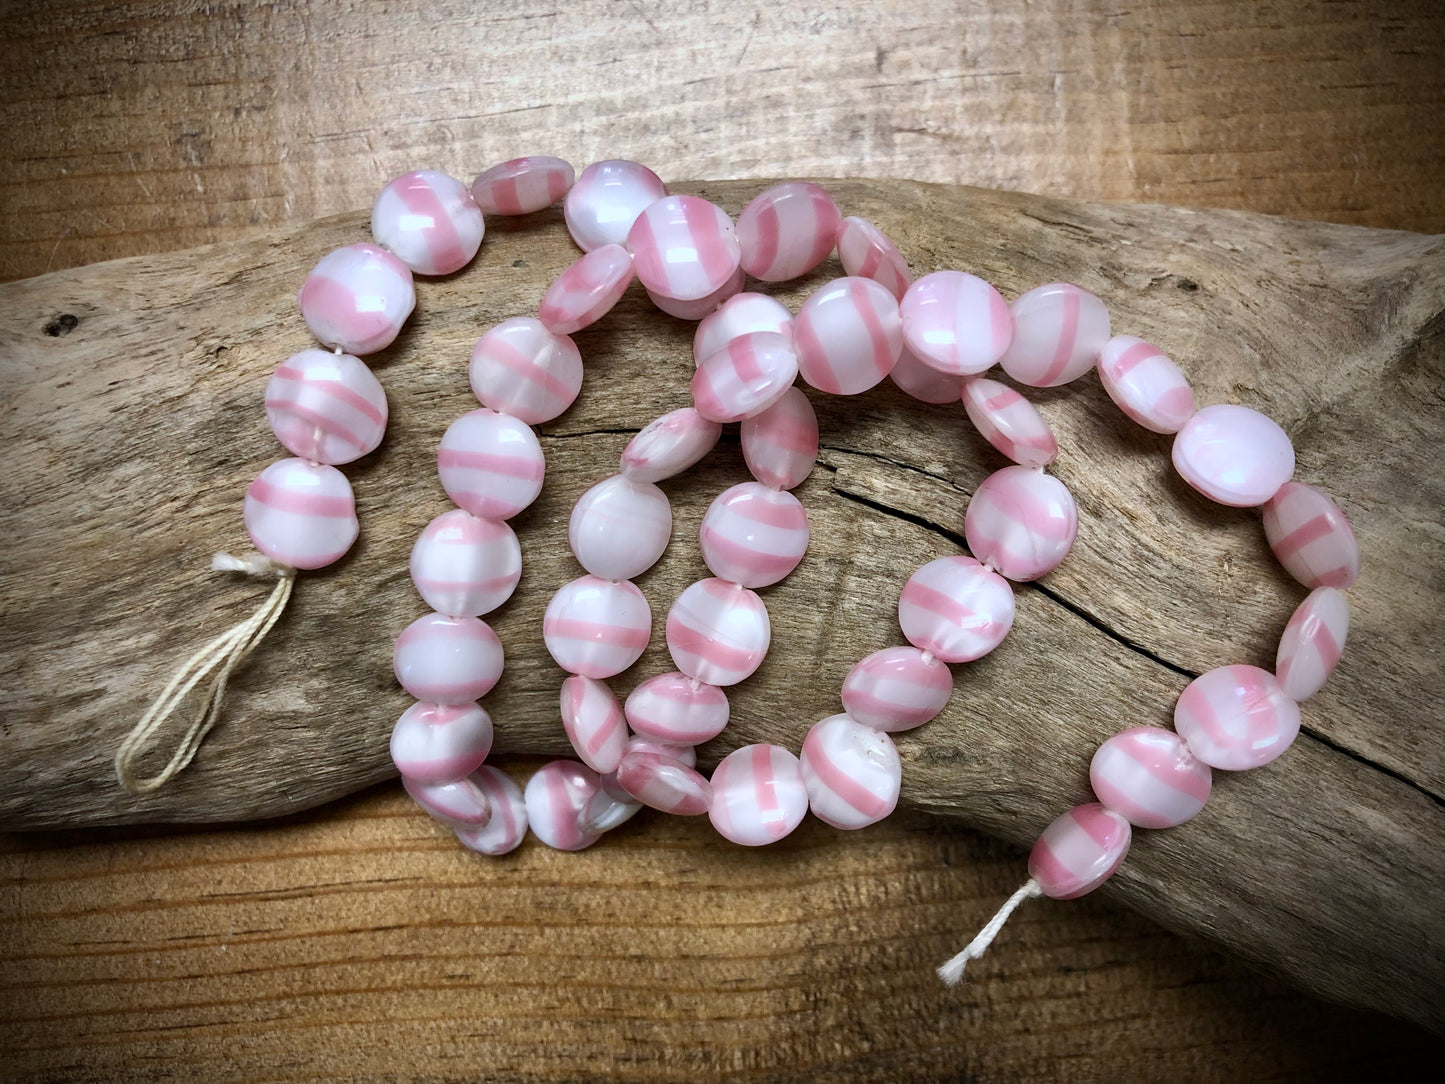 Vintage Glass Strand - Pink and White Striped Coins - 19"